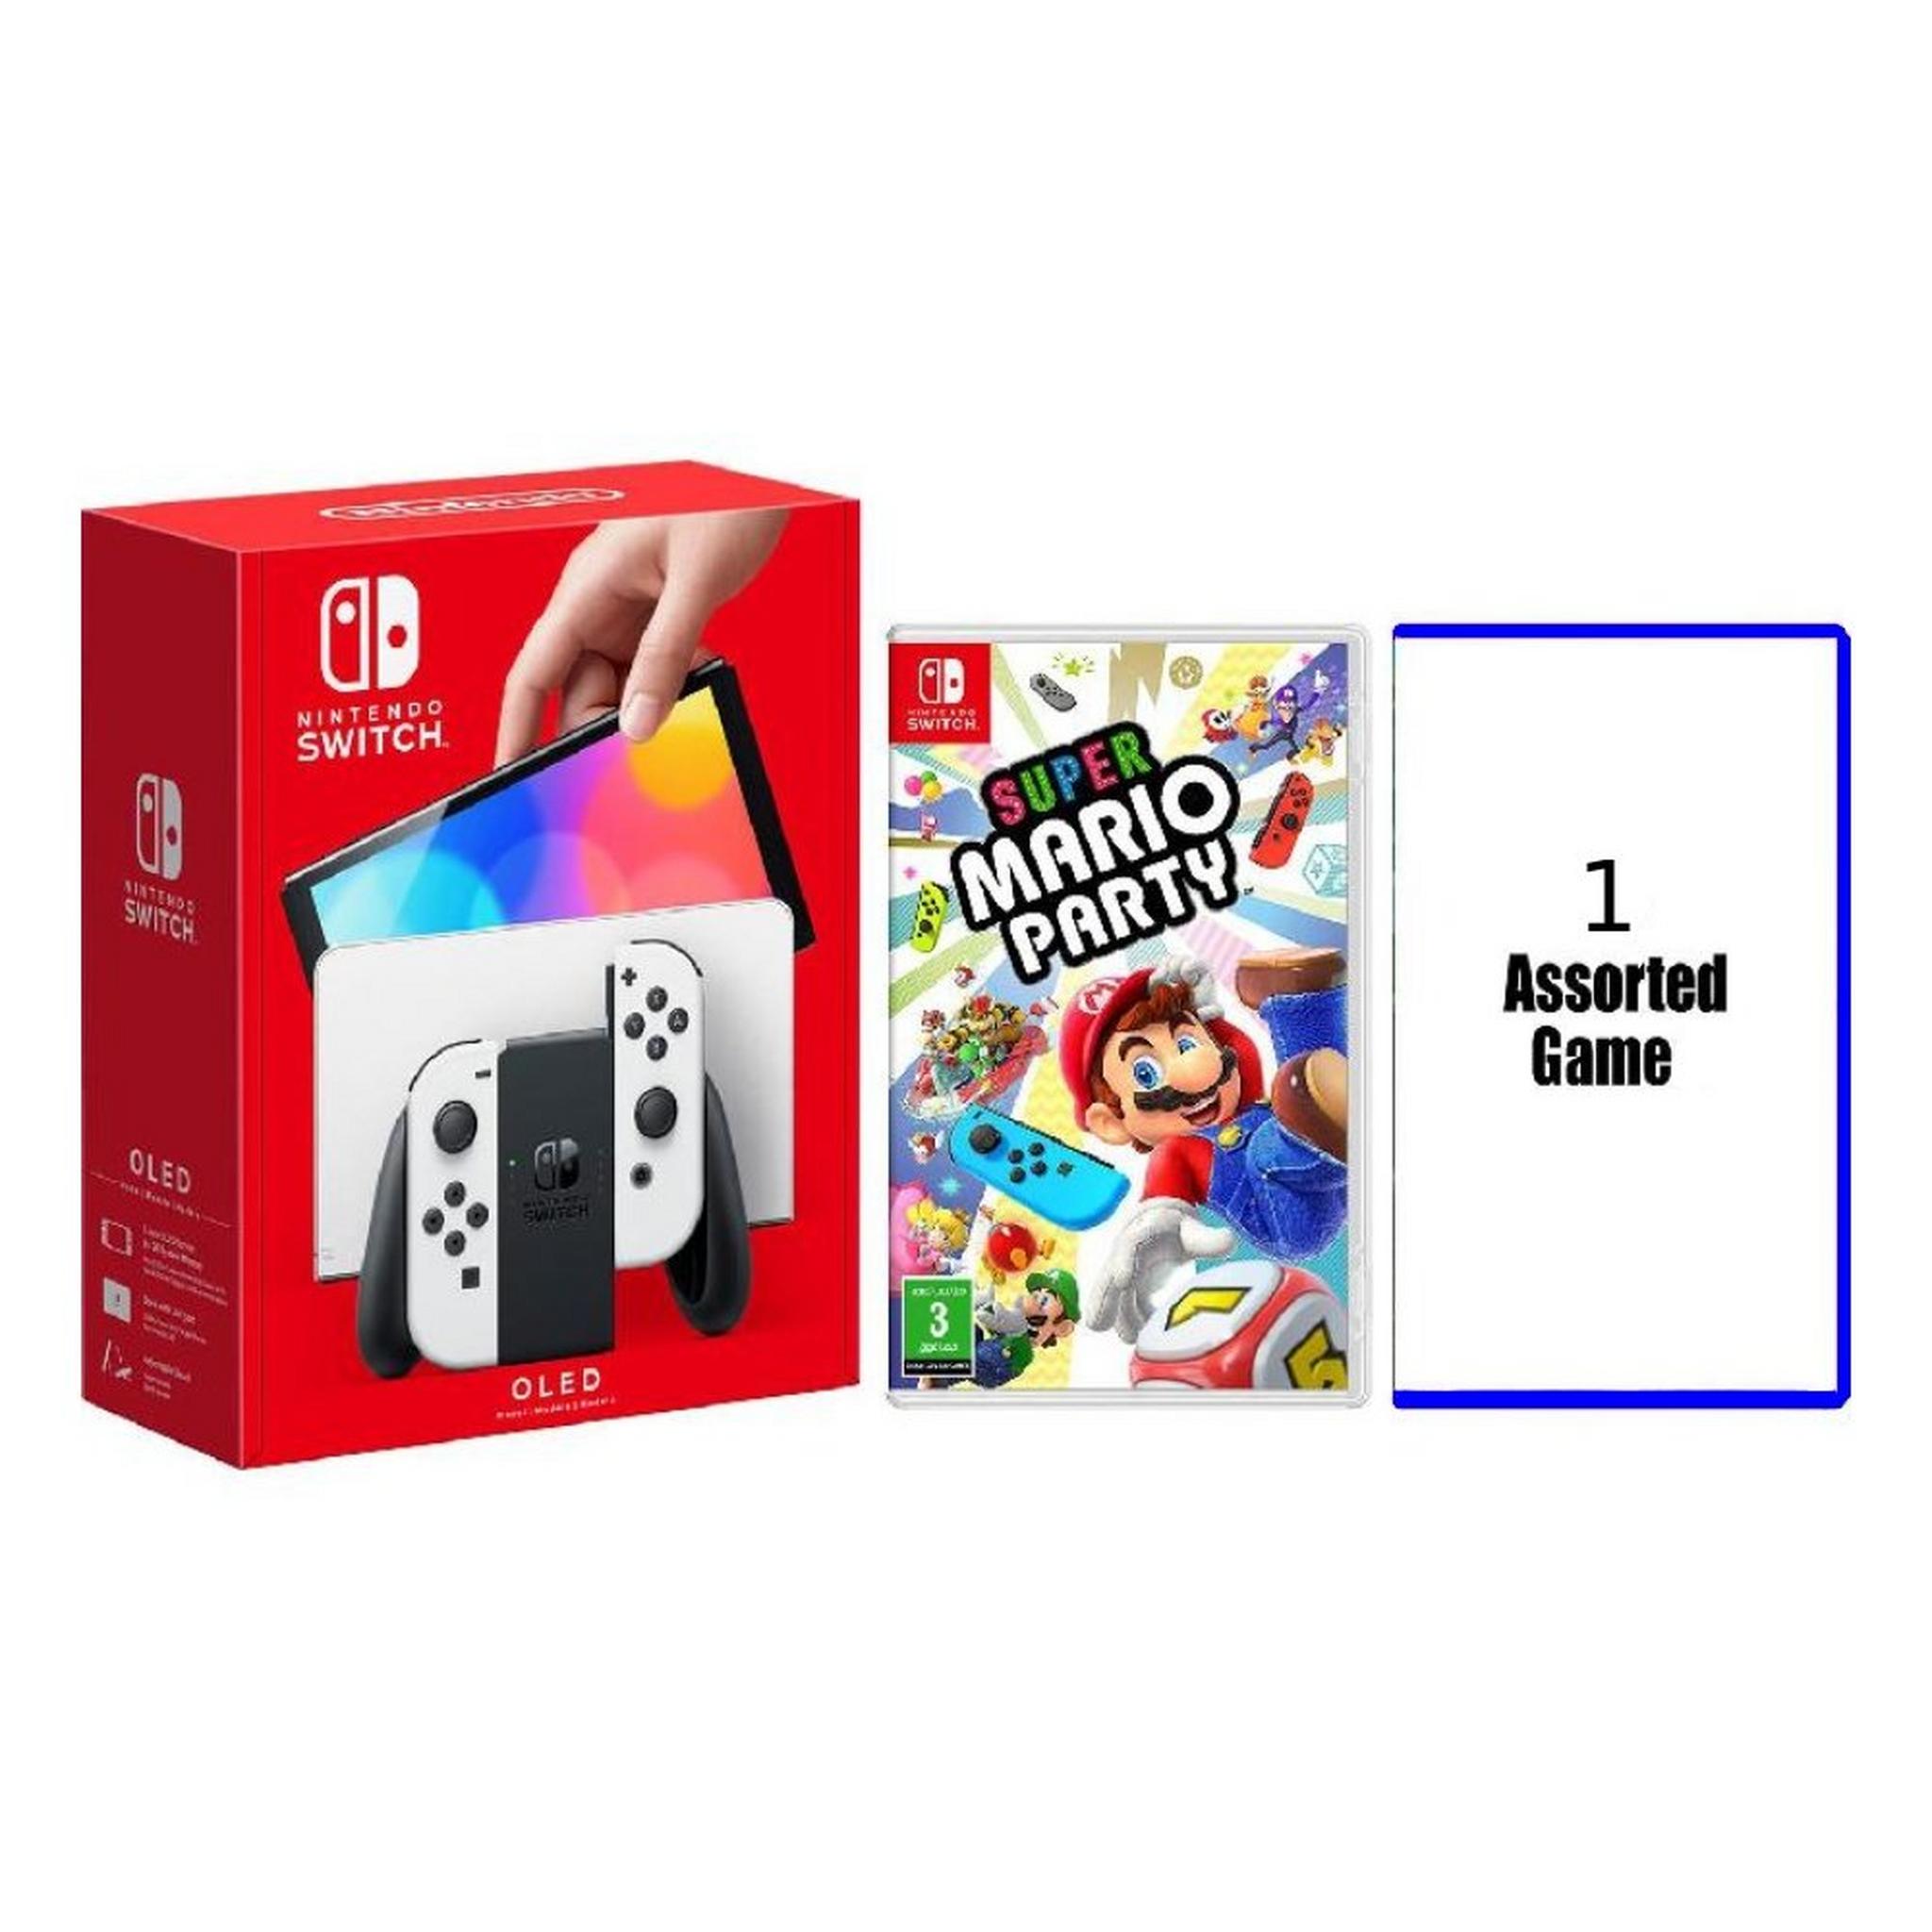 Nintendo Switch OLED 64GB Console - White + Mario Party + 1 Assorted Game